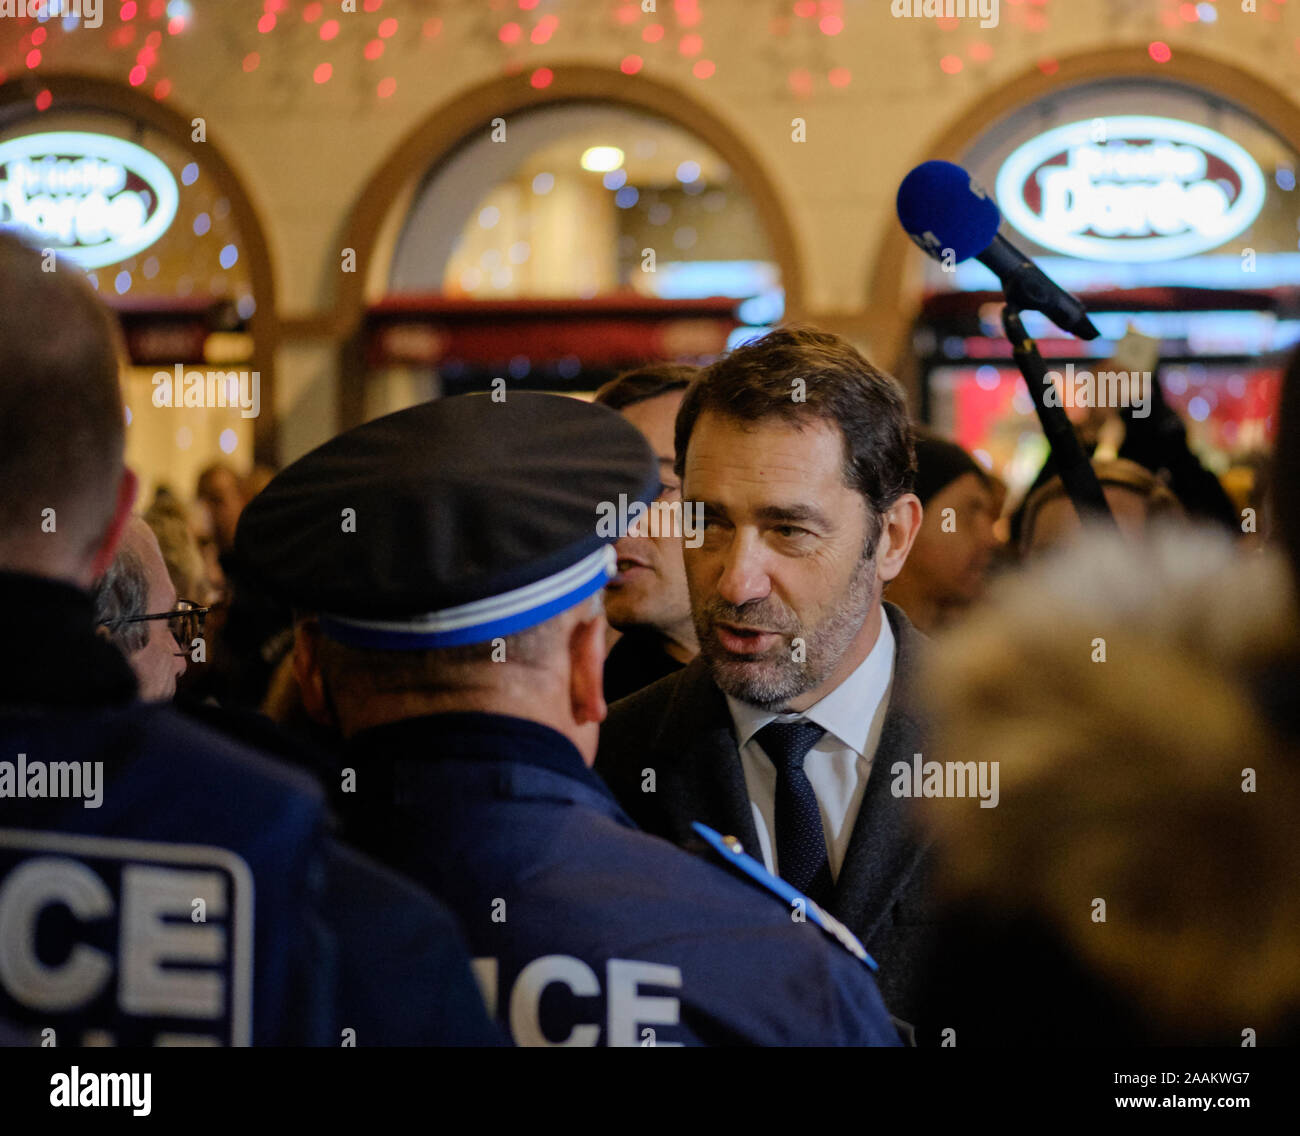 Strasbourg, France. 22nd November 2019. Opening day of the annual Strasbourg Christmas markets, one of the oldest in all of Europe. Christophe Castaner, French Minister of Home Affairs (ministre de l’intérieur) visiting the various markets and thanking security forces in effort to reassure public after the terrorist acts from last year.  The market will remain open until December 30th. Stock Photo